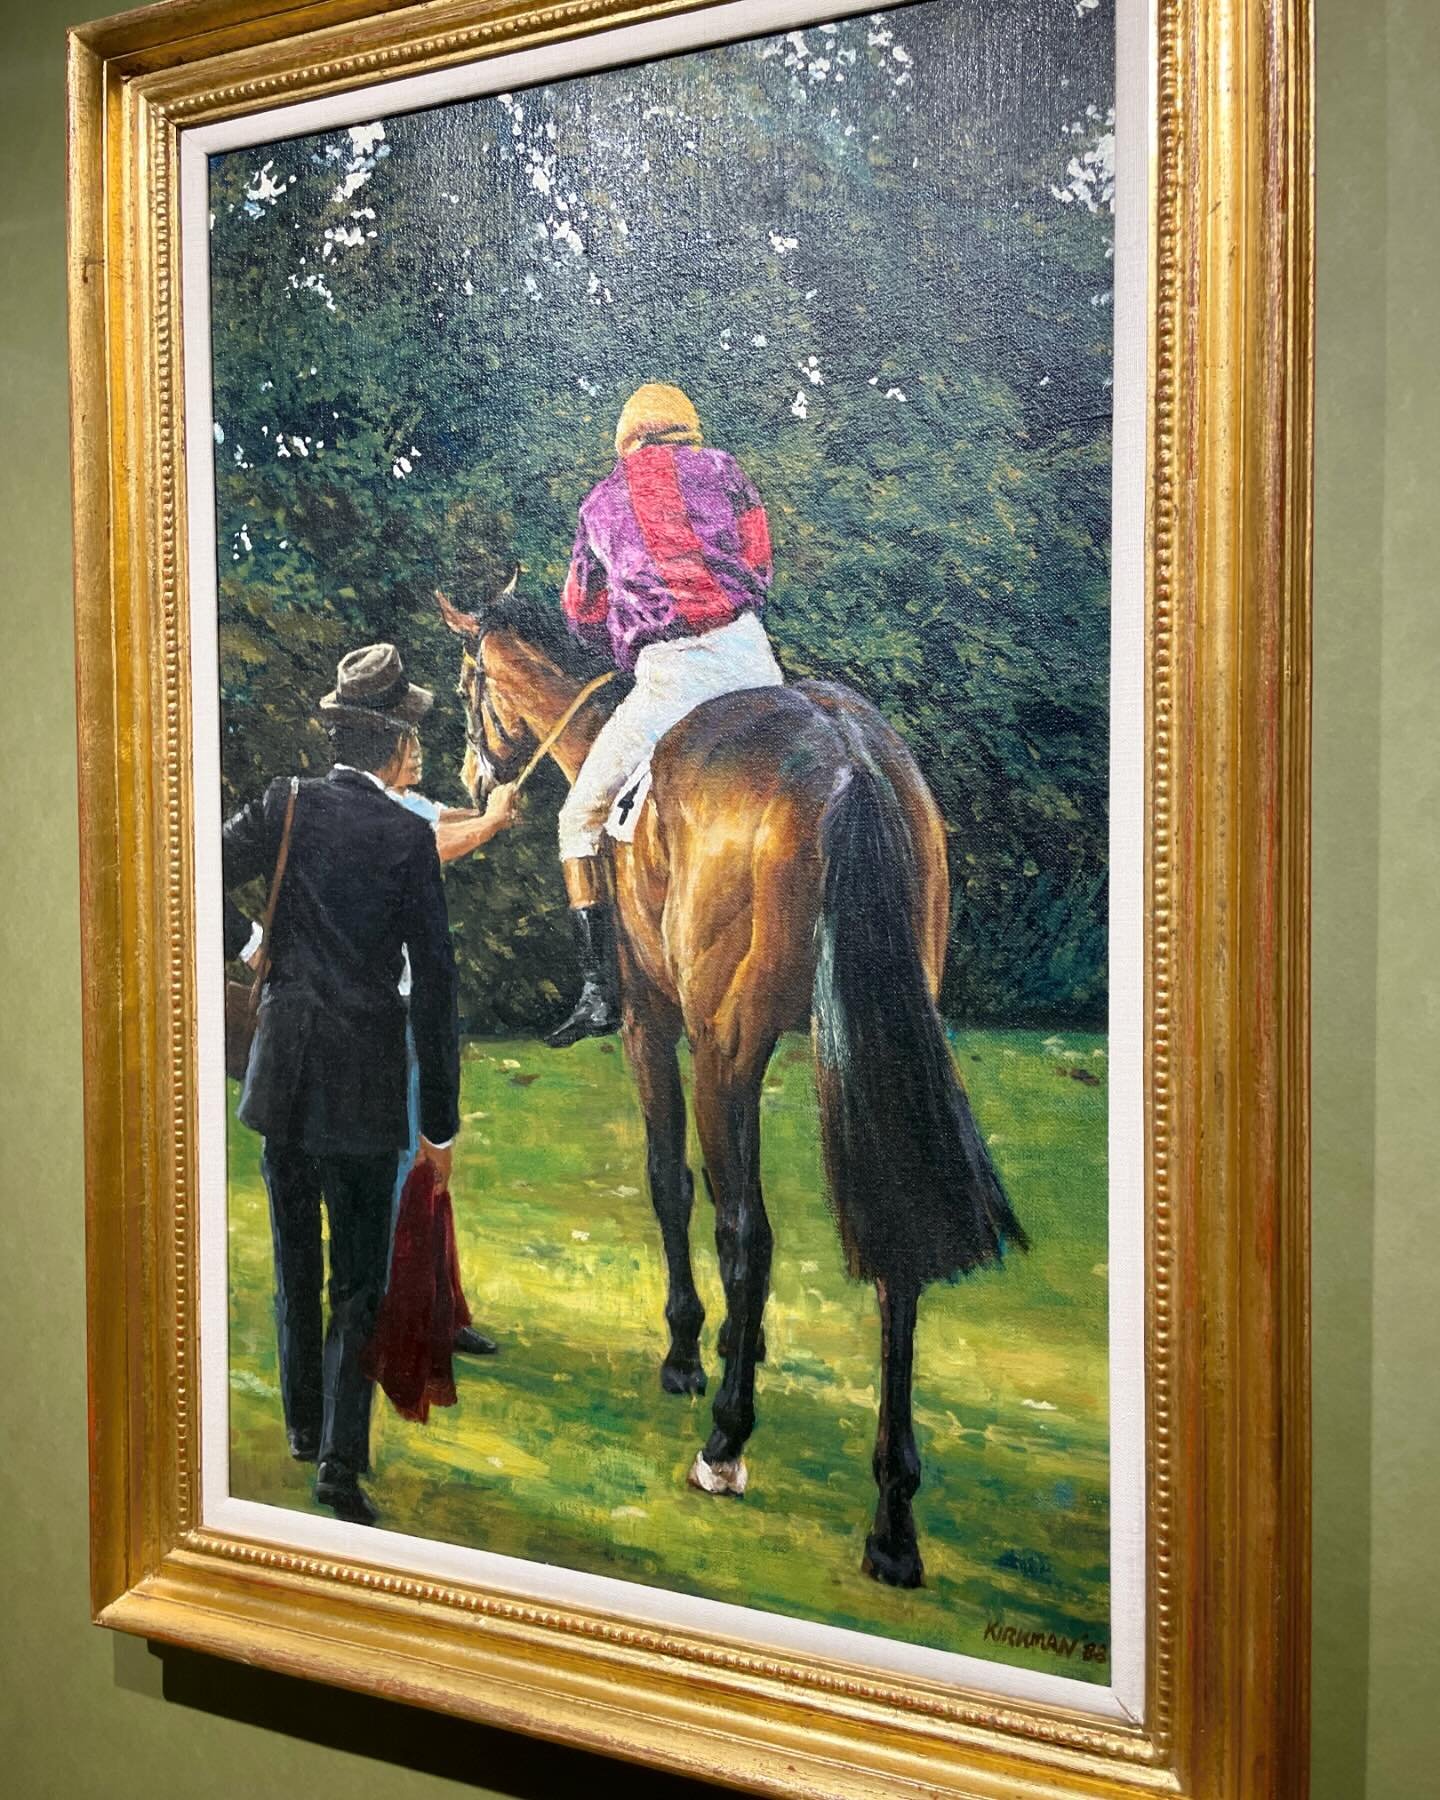 Jay Kirkman&rsquo;s artistry unfolds in the quiet moment of unsaddling, where the bond between horse and jockey lingers. 
Unsaddling at Windsor
Oil on canvas 
Signed lower right
Frame:  36 x 26 inches
Please DM for additional details 

*
*
*
*
*
*

#